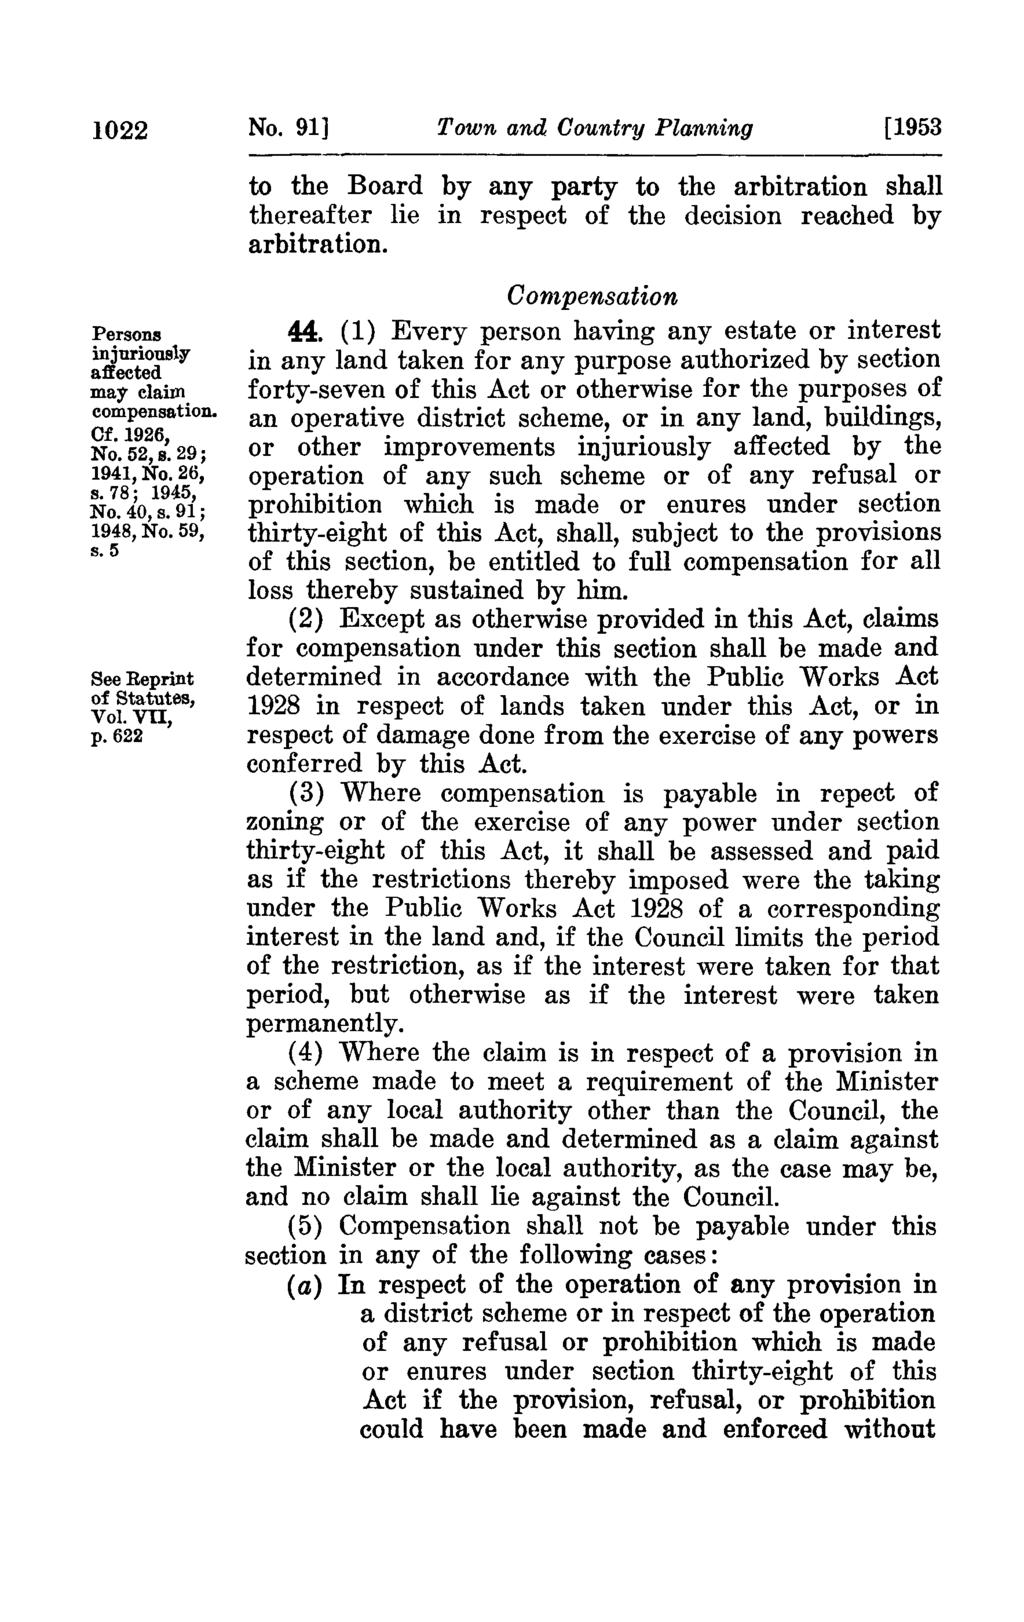 1022 No. 91] Town and Country Planning [1953 to the Board by any party to the arbitration shall thereafter lie in respect of the decision reached by arbitration.